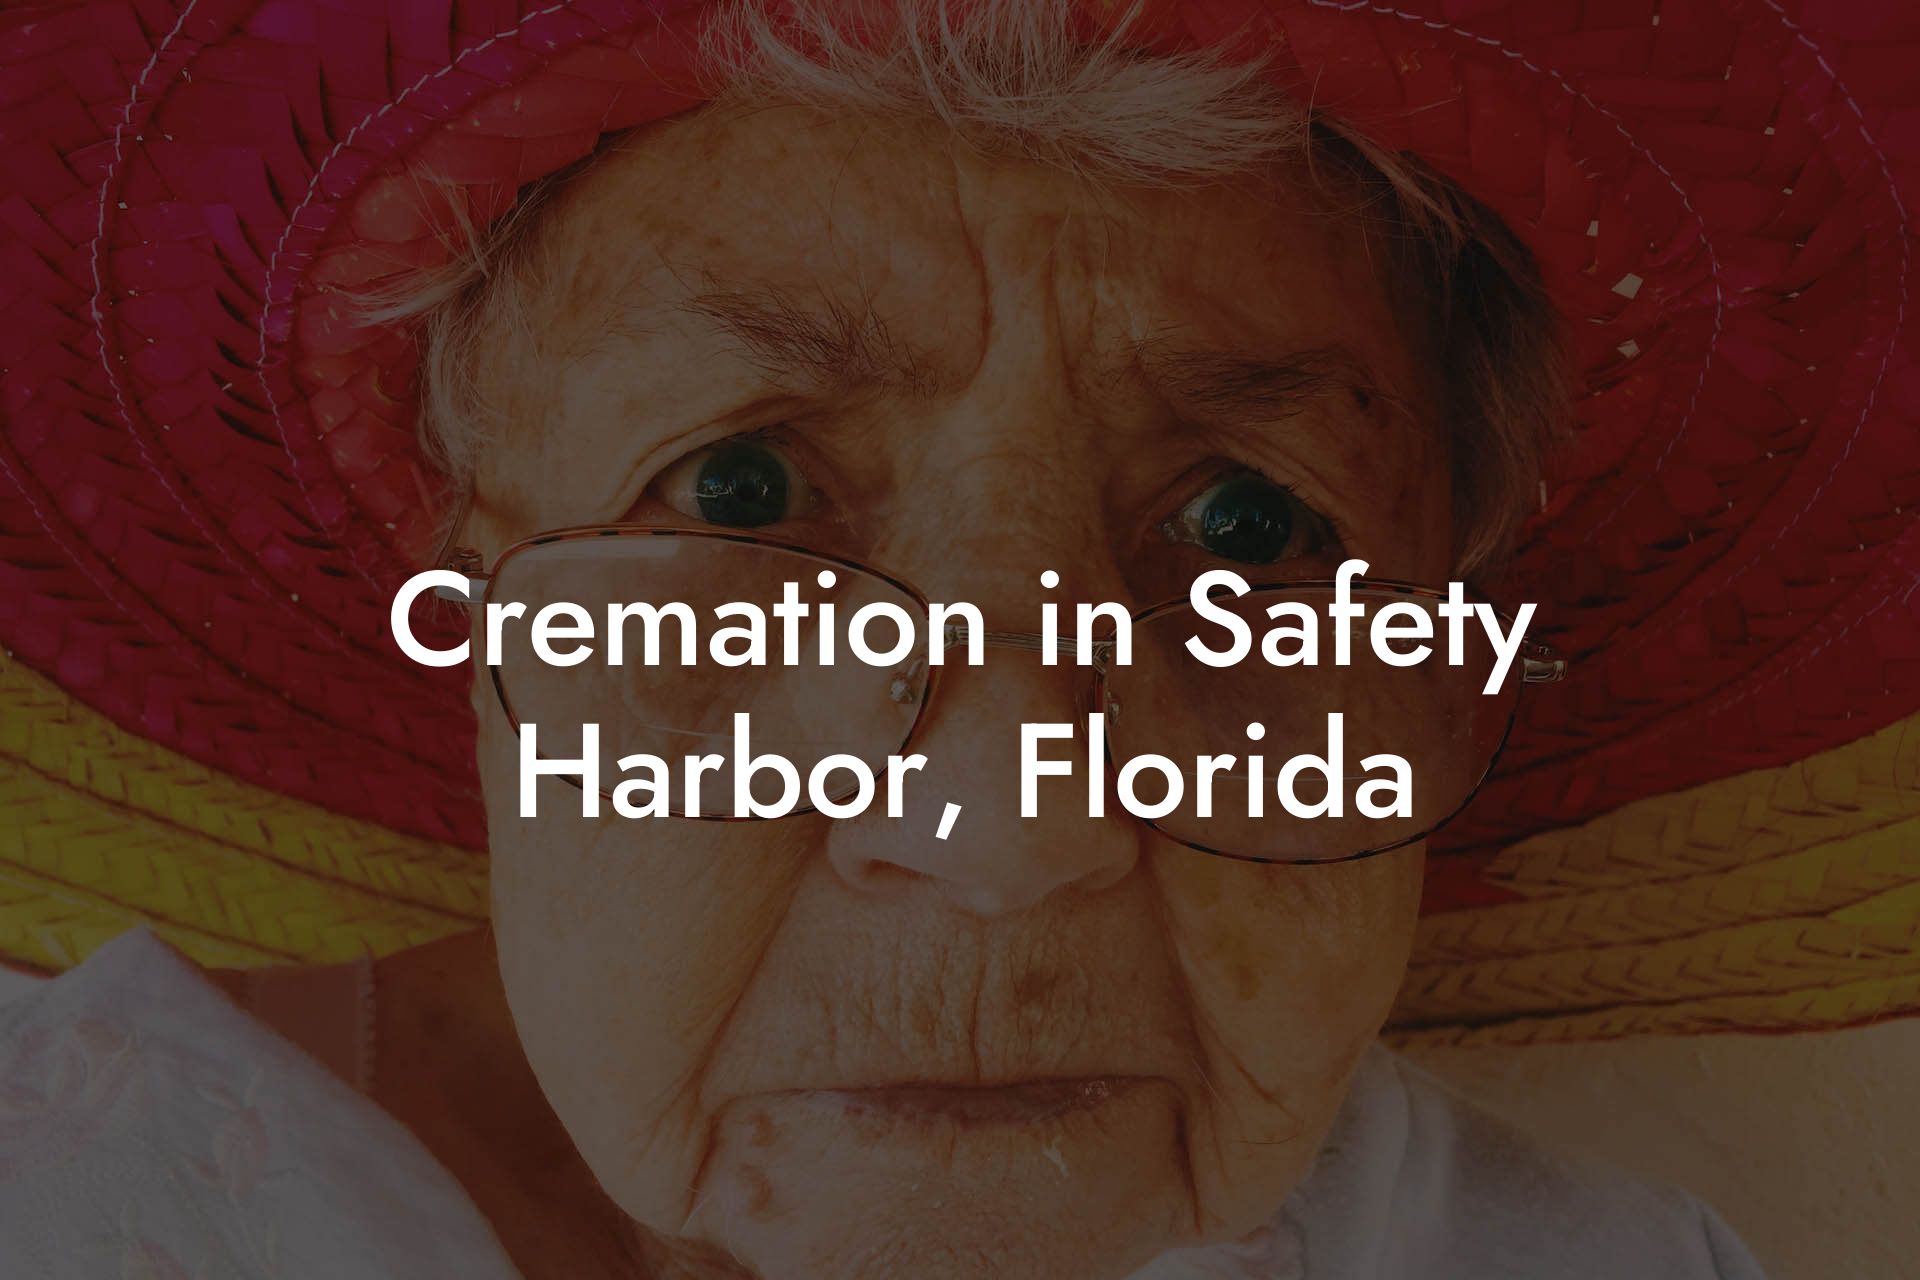 Cremation in Safety Harbor, Florida